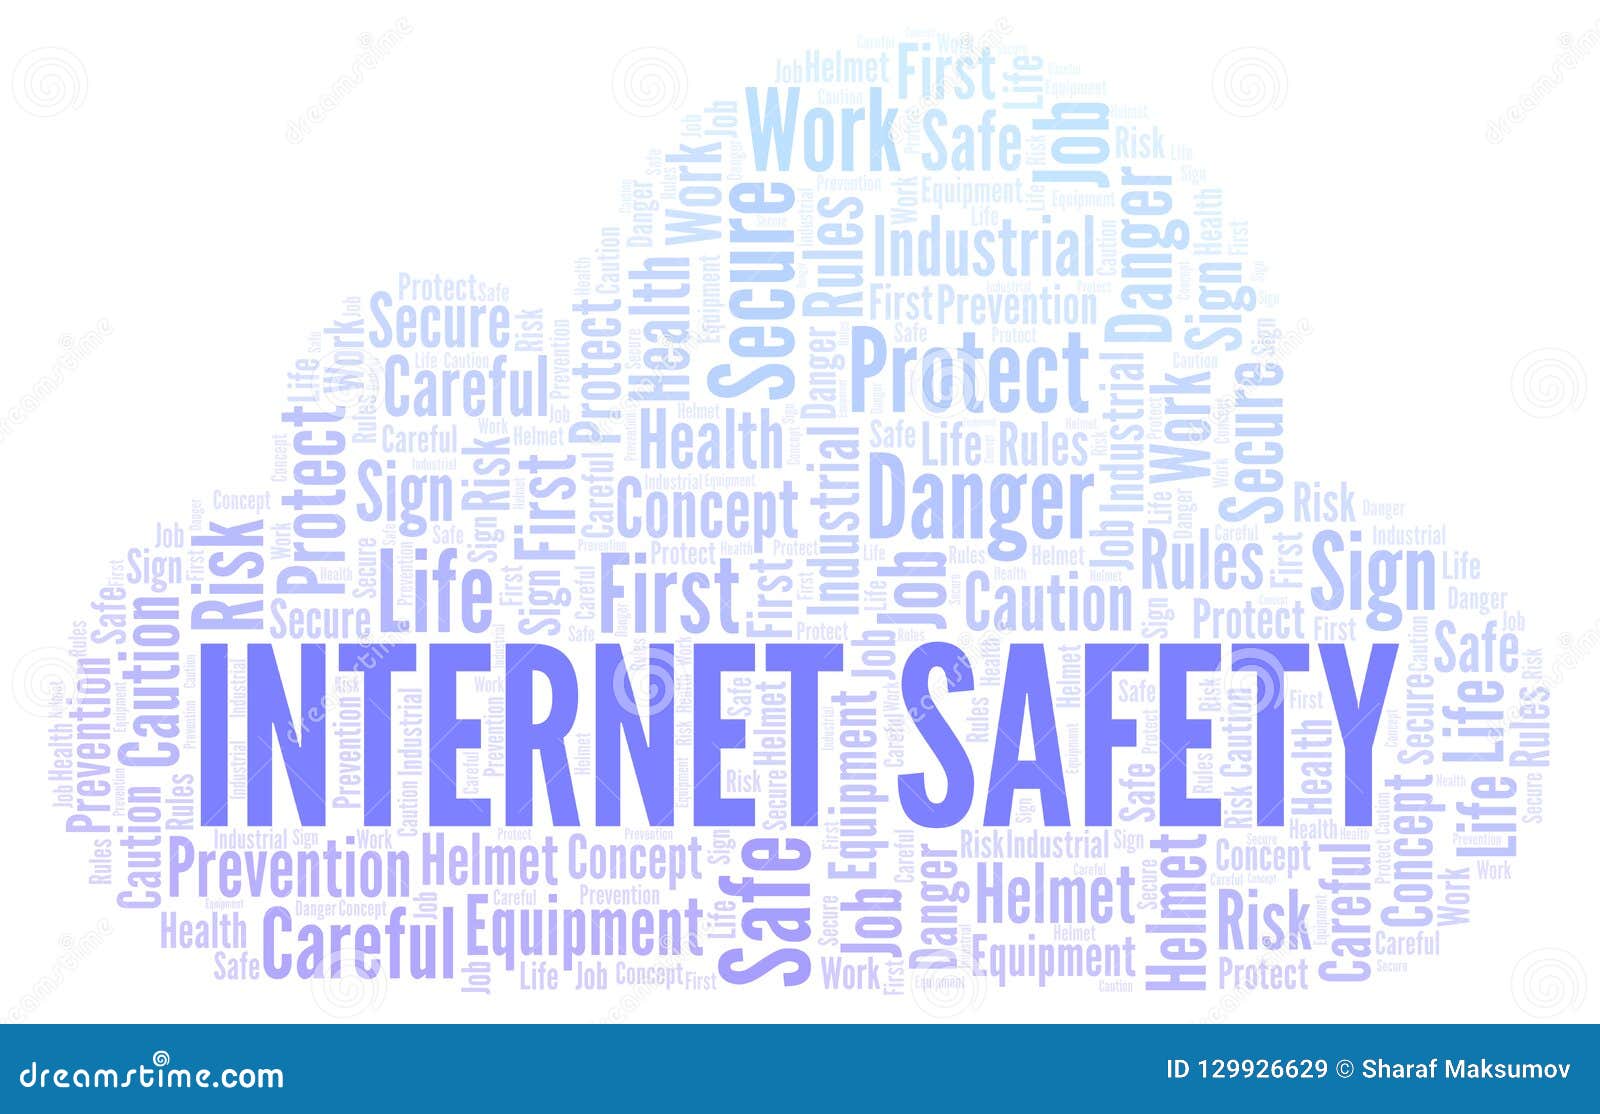 Safety internet rules of 10 Classroom